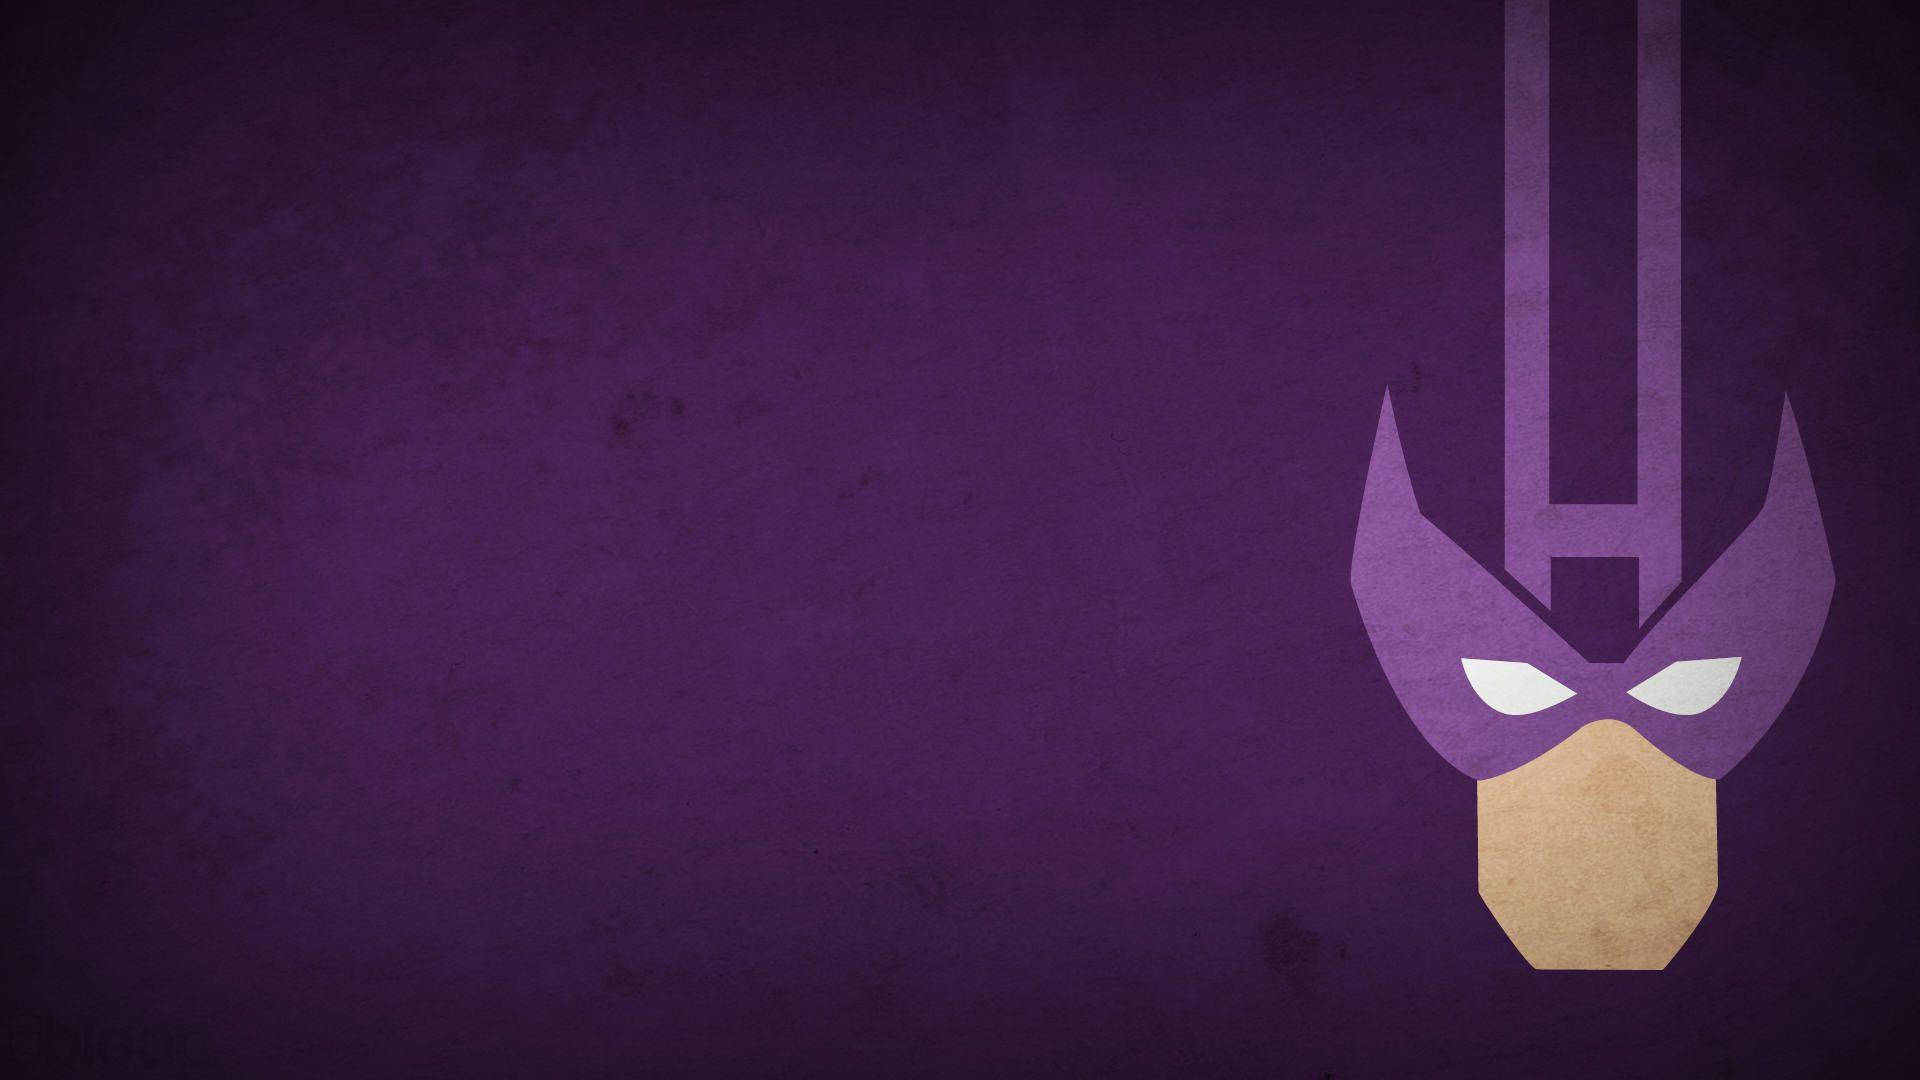 Hawkeye 1920X1080 Wallpaper and Background Image